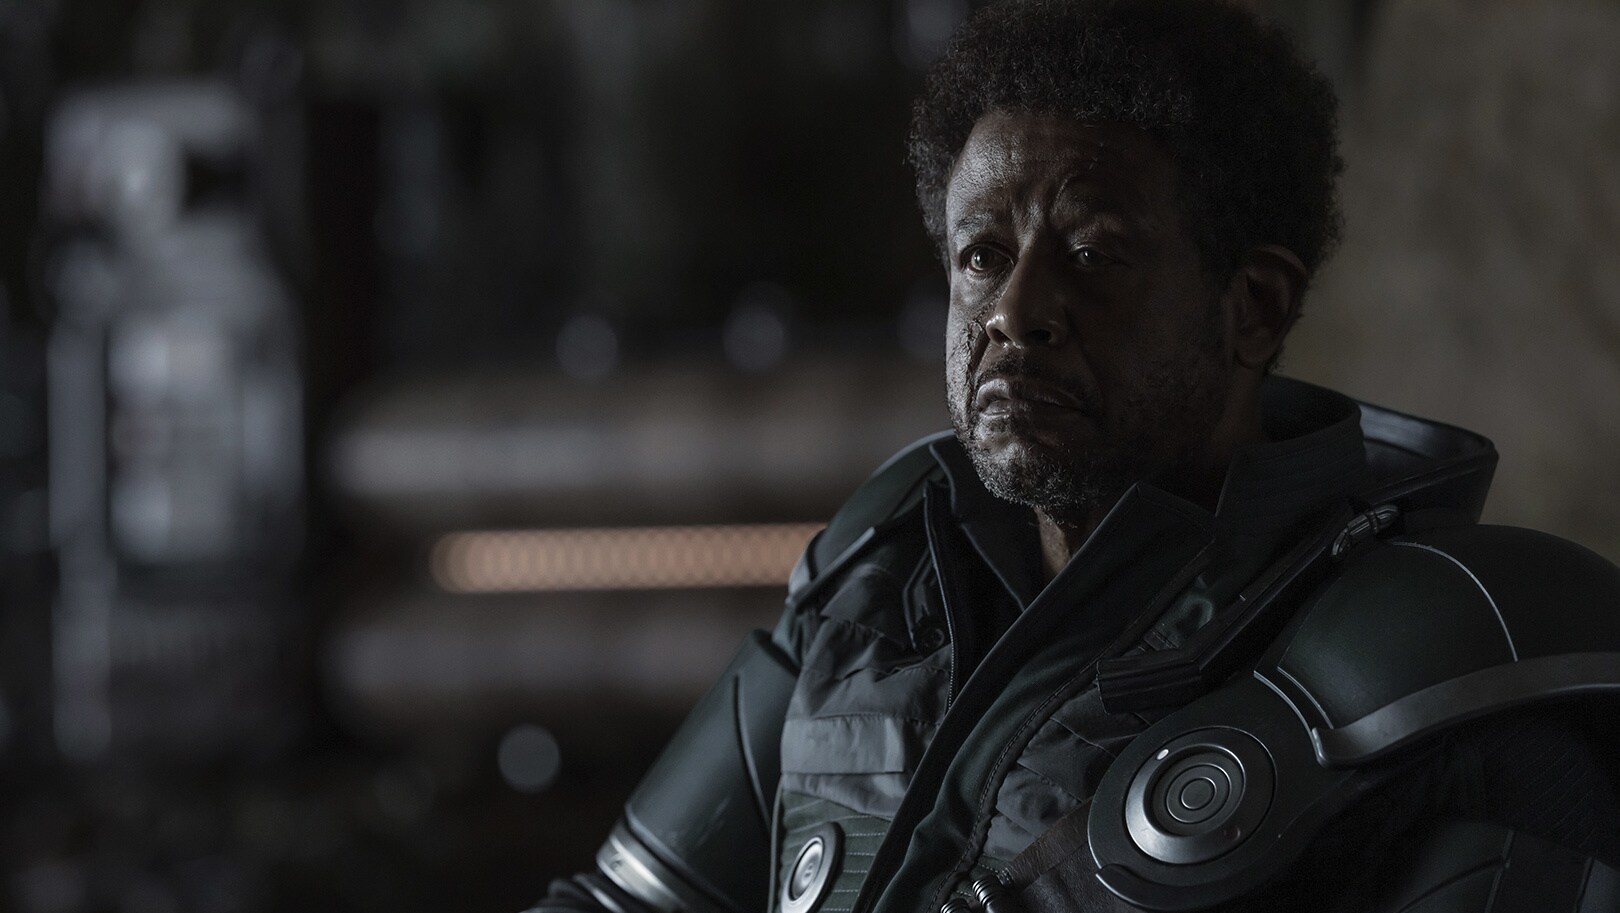 "What are you, Luthen? I've never really known. What ARE you?" - Saw Gerrera